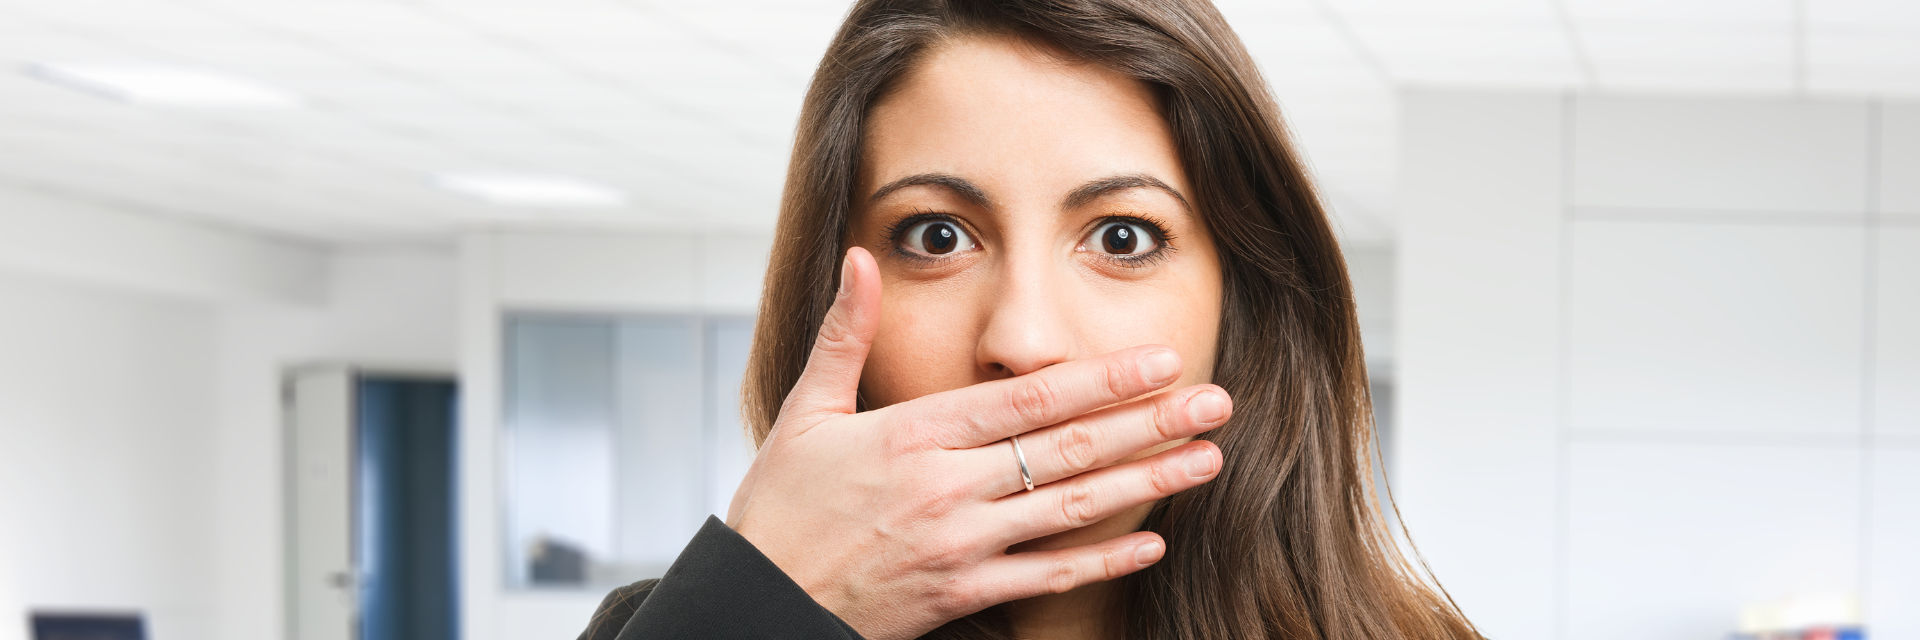 young woman covering her mouth with her hand due to halitosis